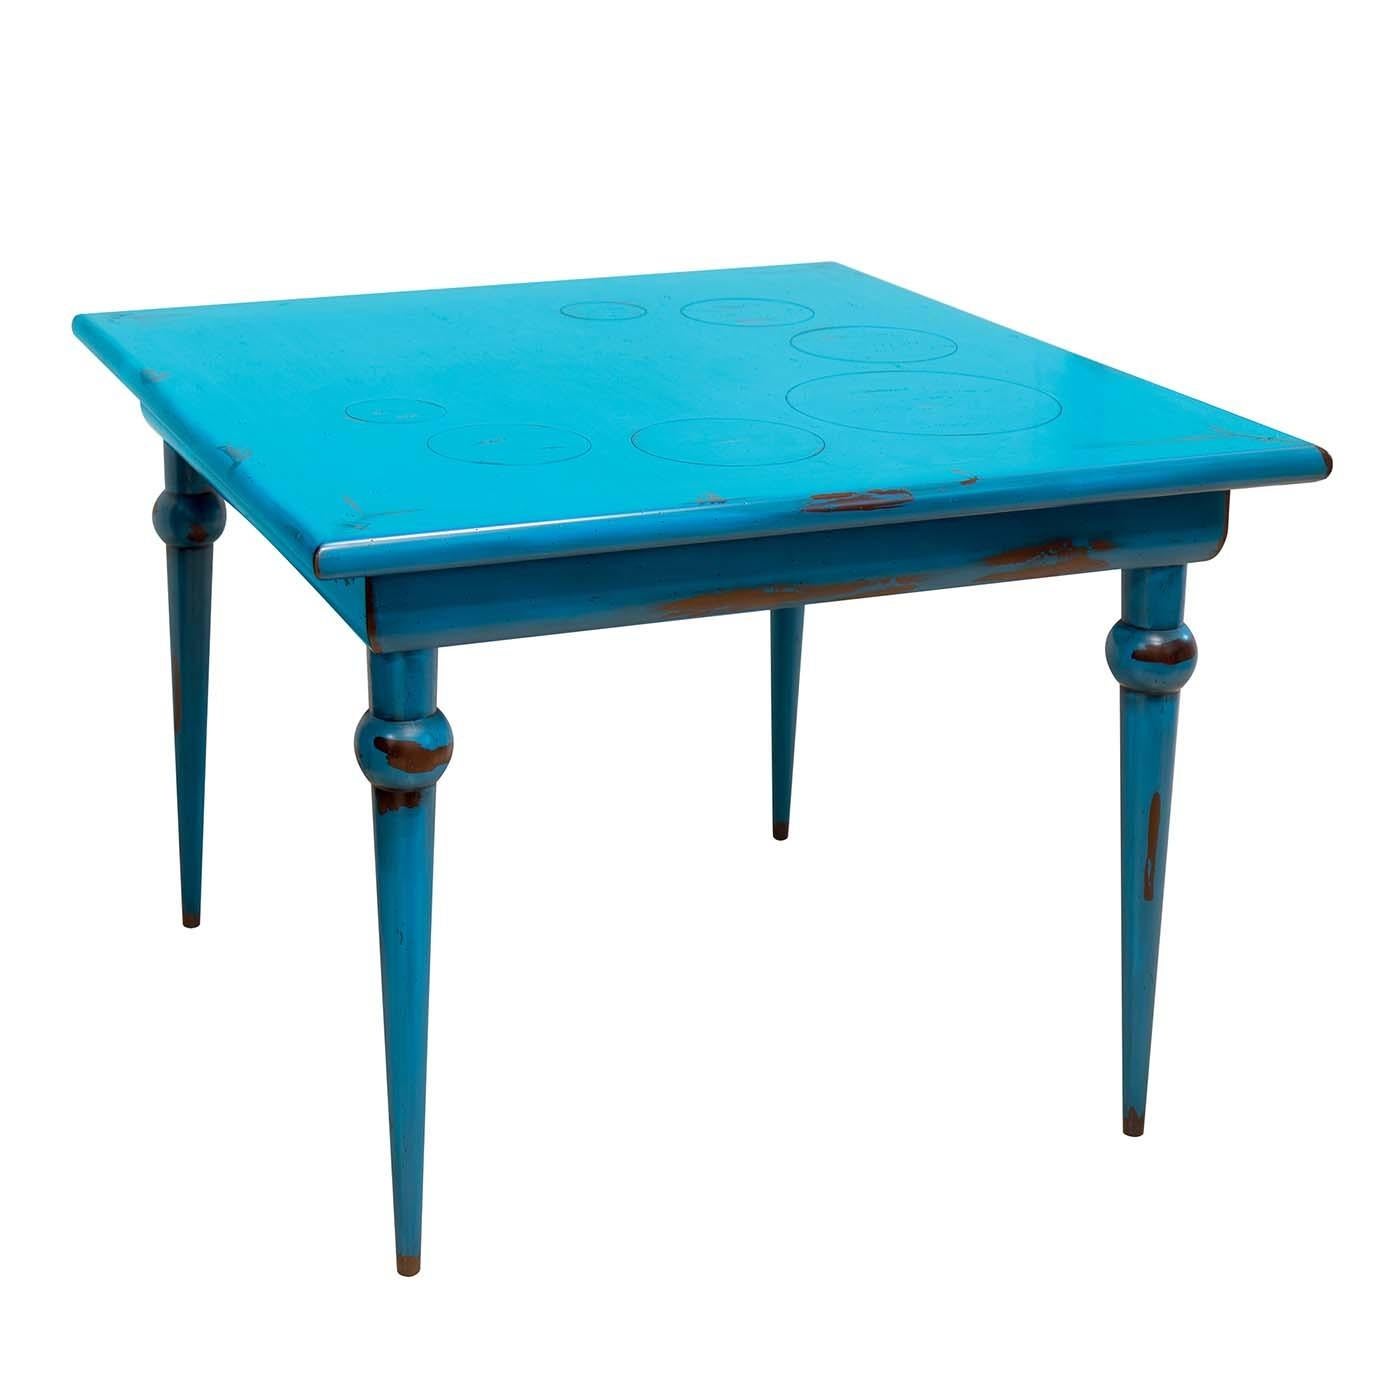 Bursting with a vivid cobalt blue color, this striking dining table is a practical and versatile piece of functional decor. Fashioned of Toulipier walnut and Tanganica veneer, the square top is decorated with the engraved circle of bubbles